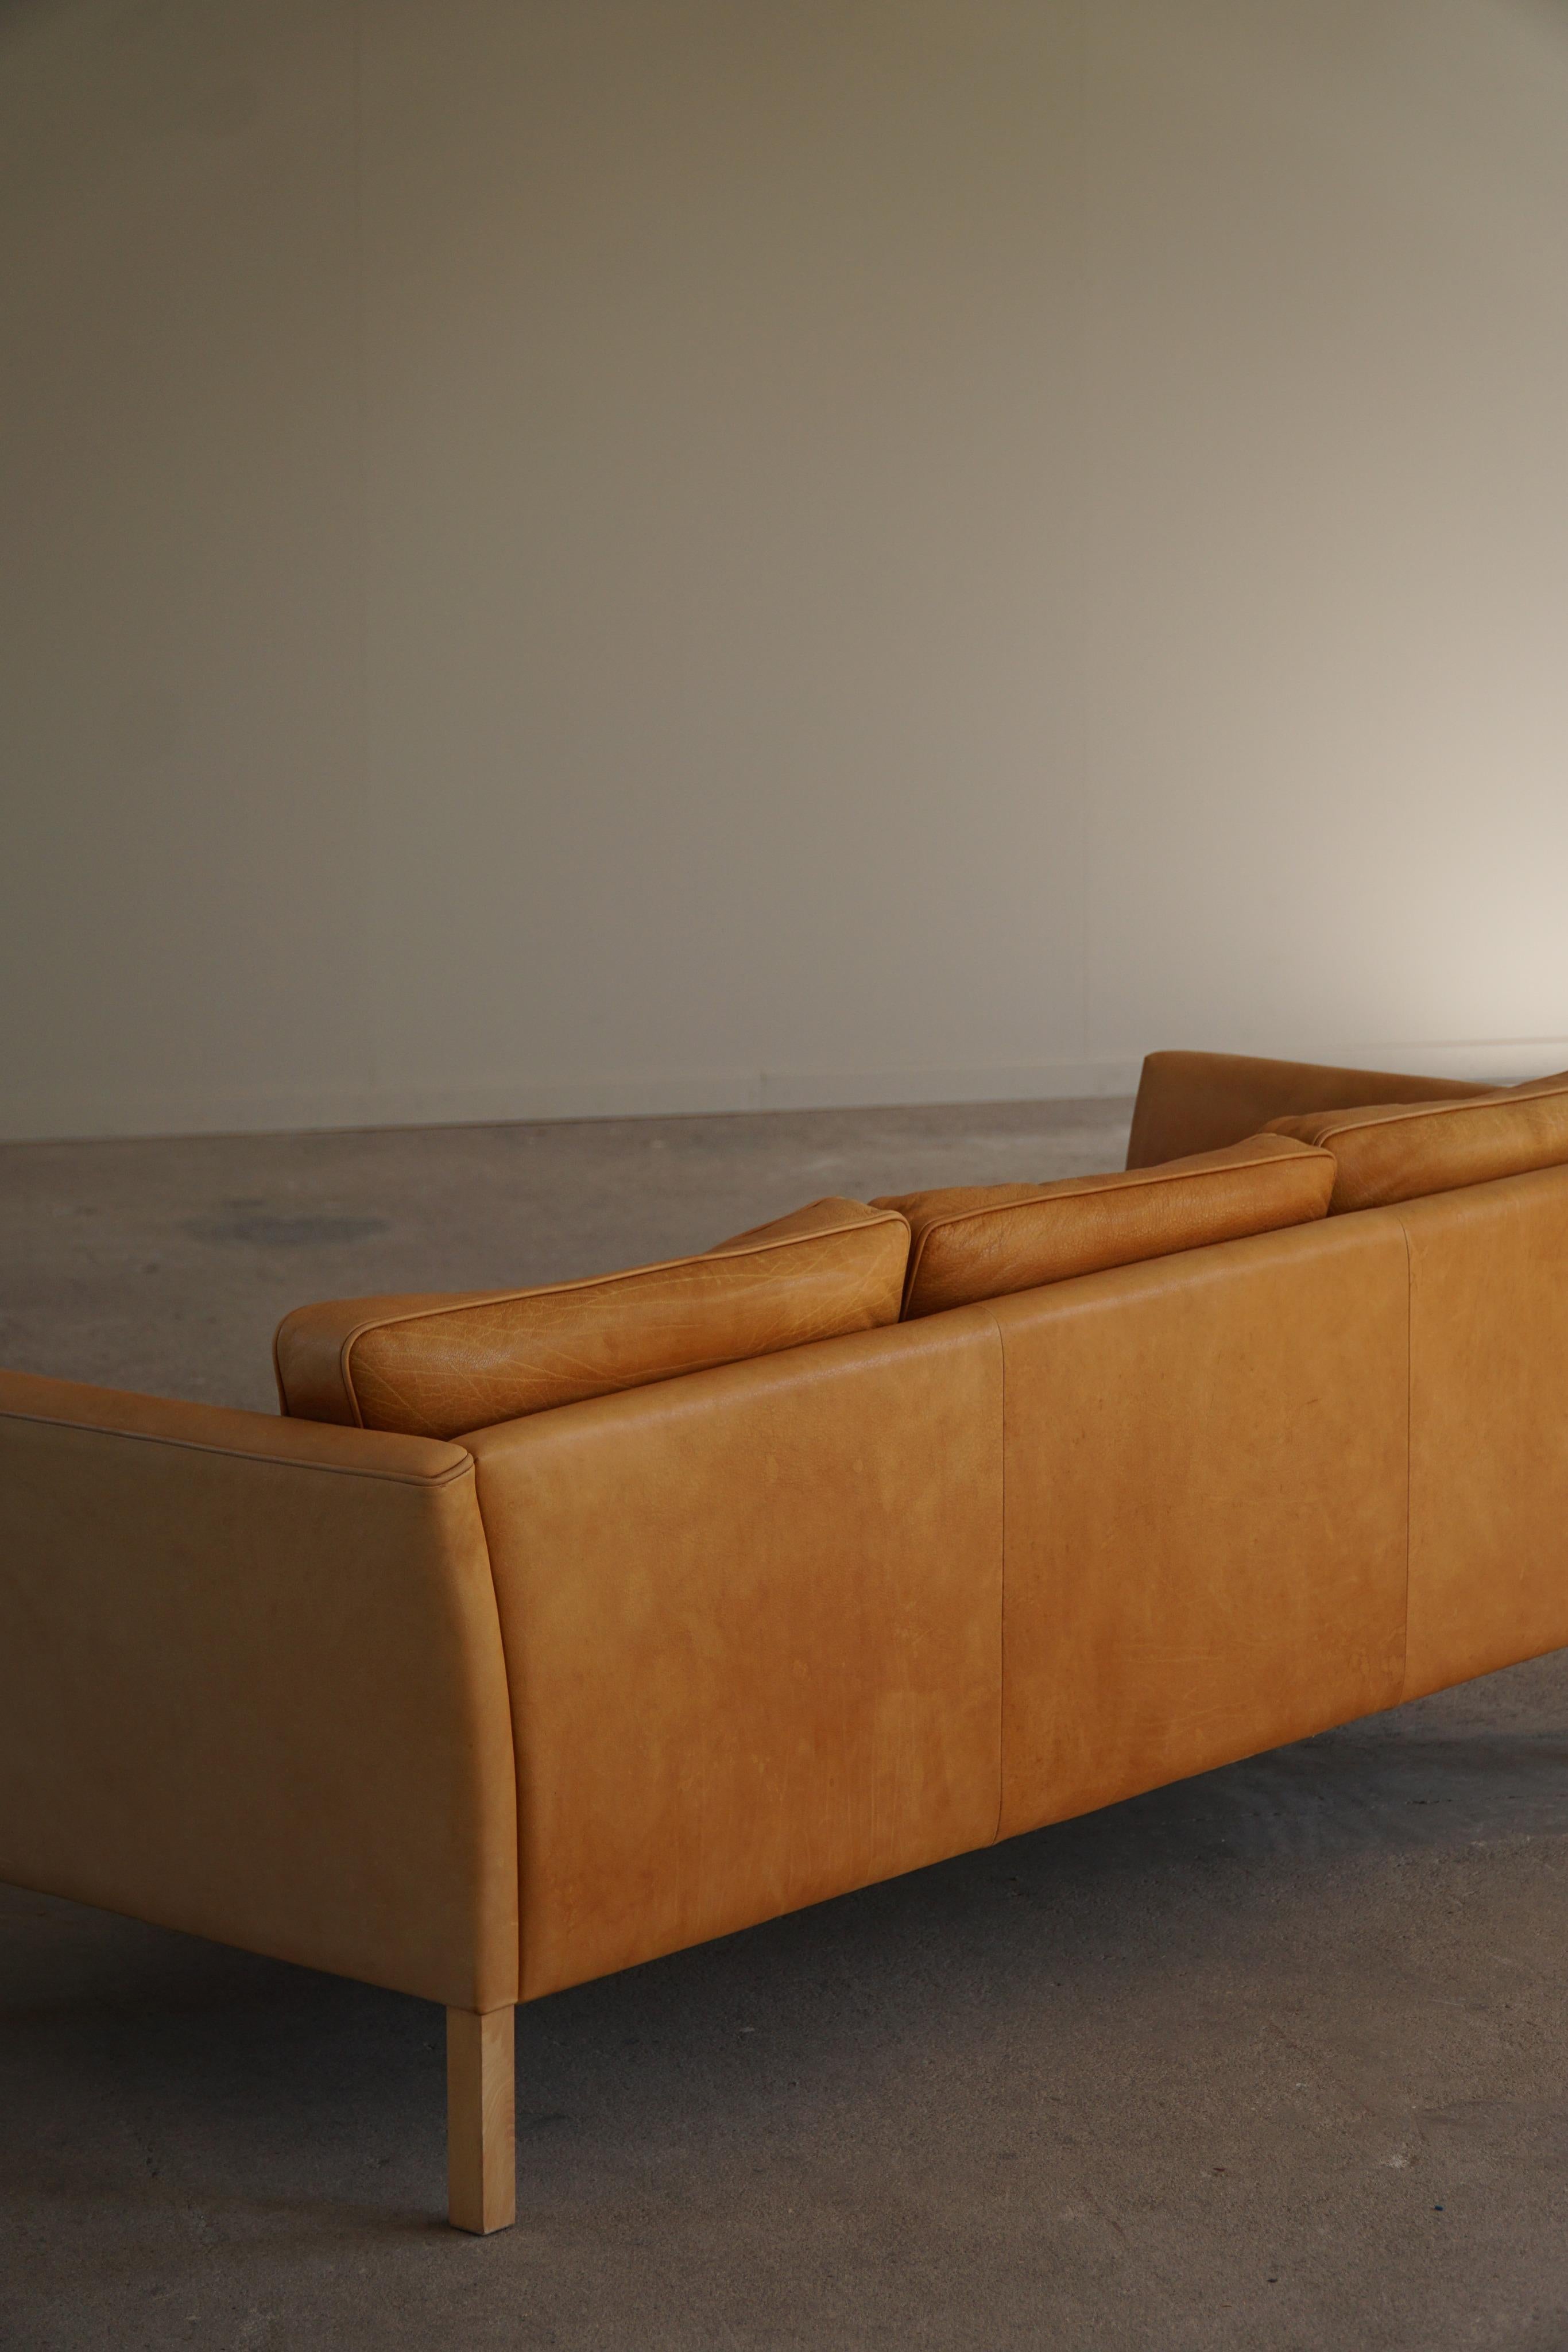 Danish Midcentury Stouby 3-Seater Sofa in Cognac Brown Leather, Made in 1970s For Sale 13